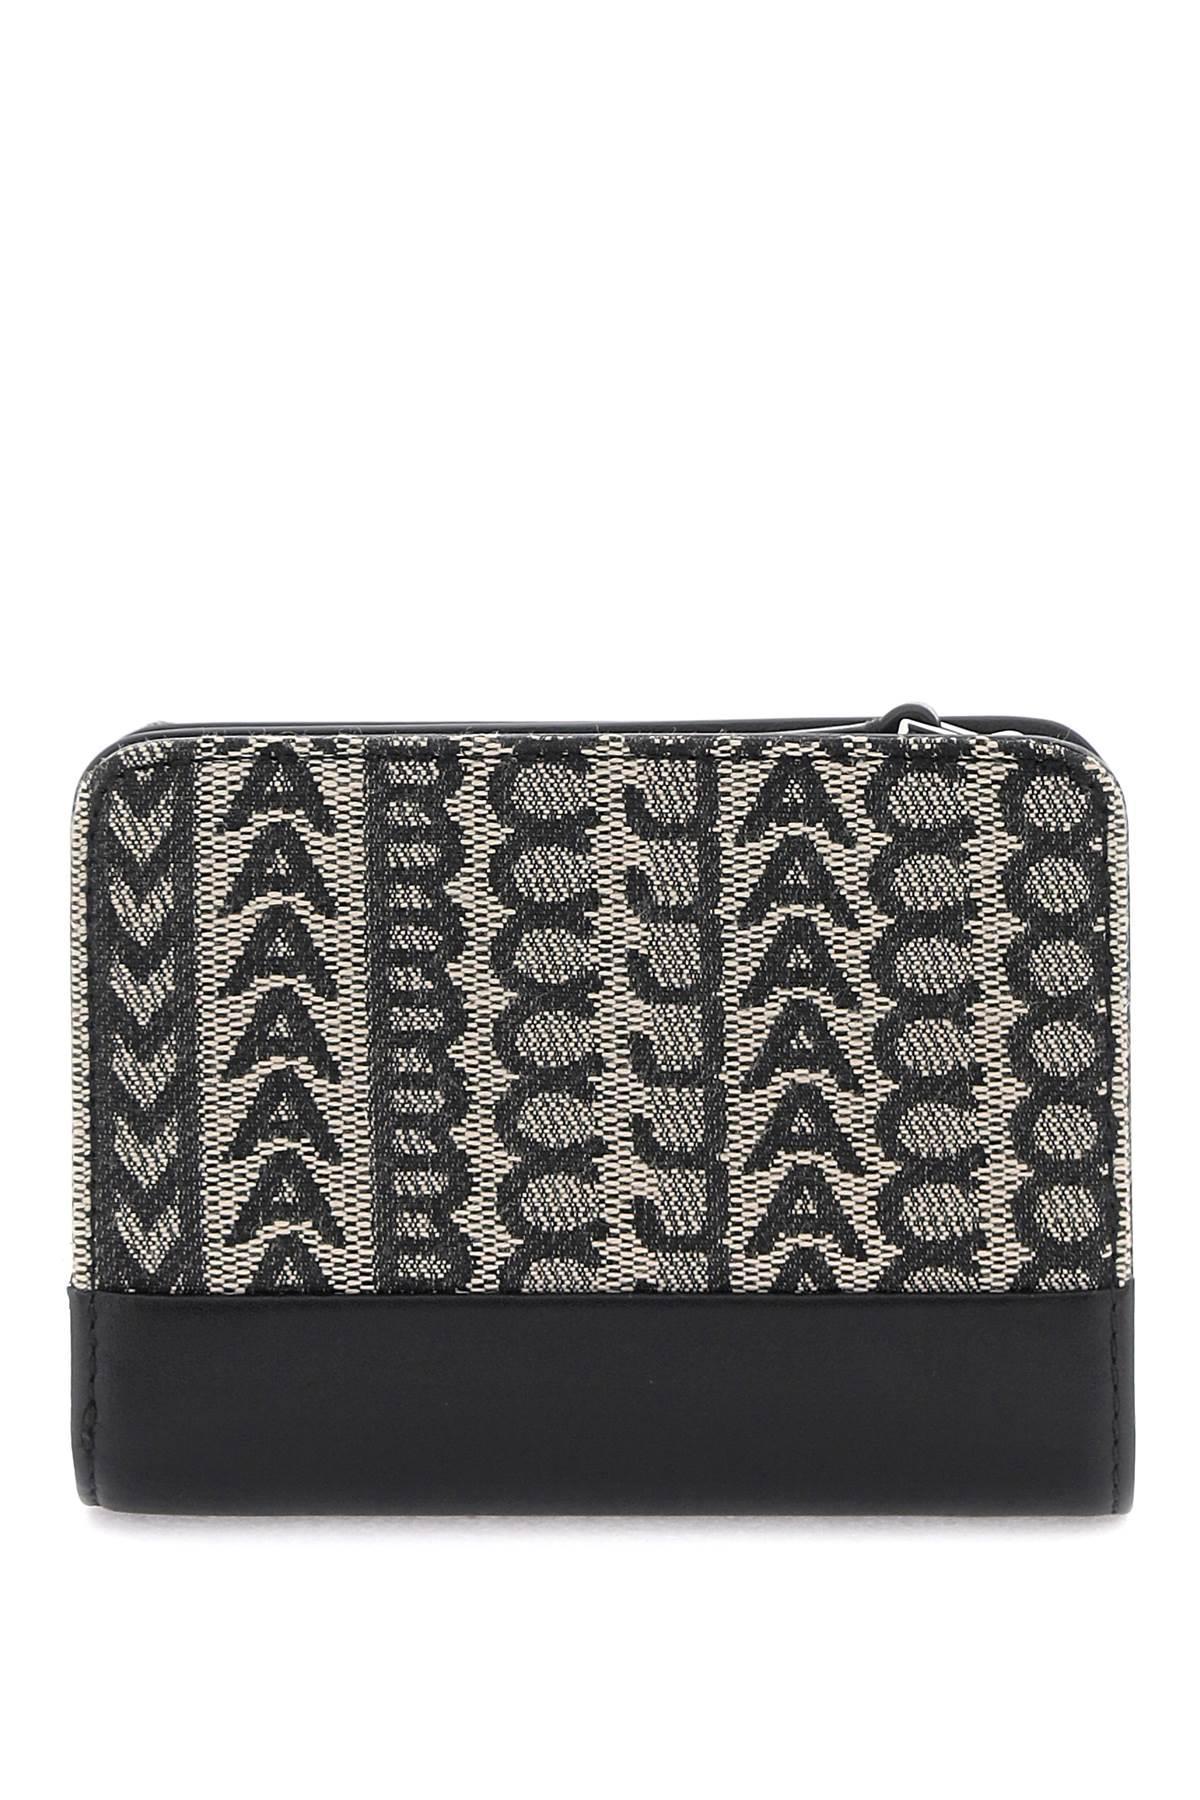 Marc Jacobs The Monogram Jacquard Mini Compact Wallet in Black | Lyst